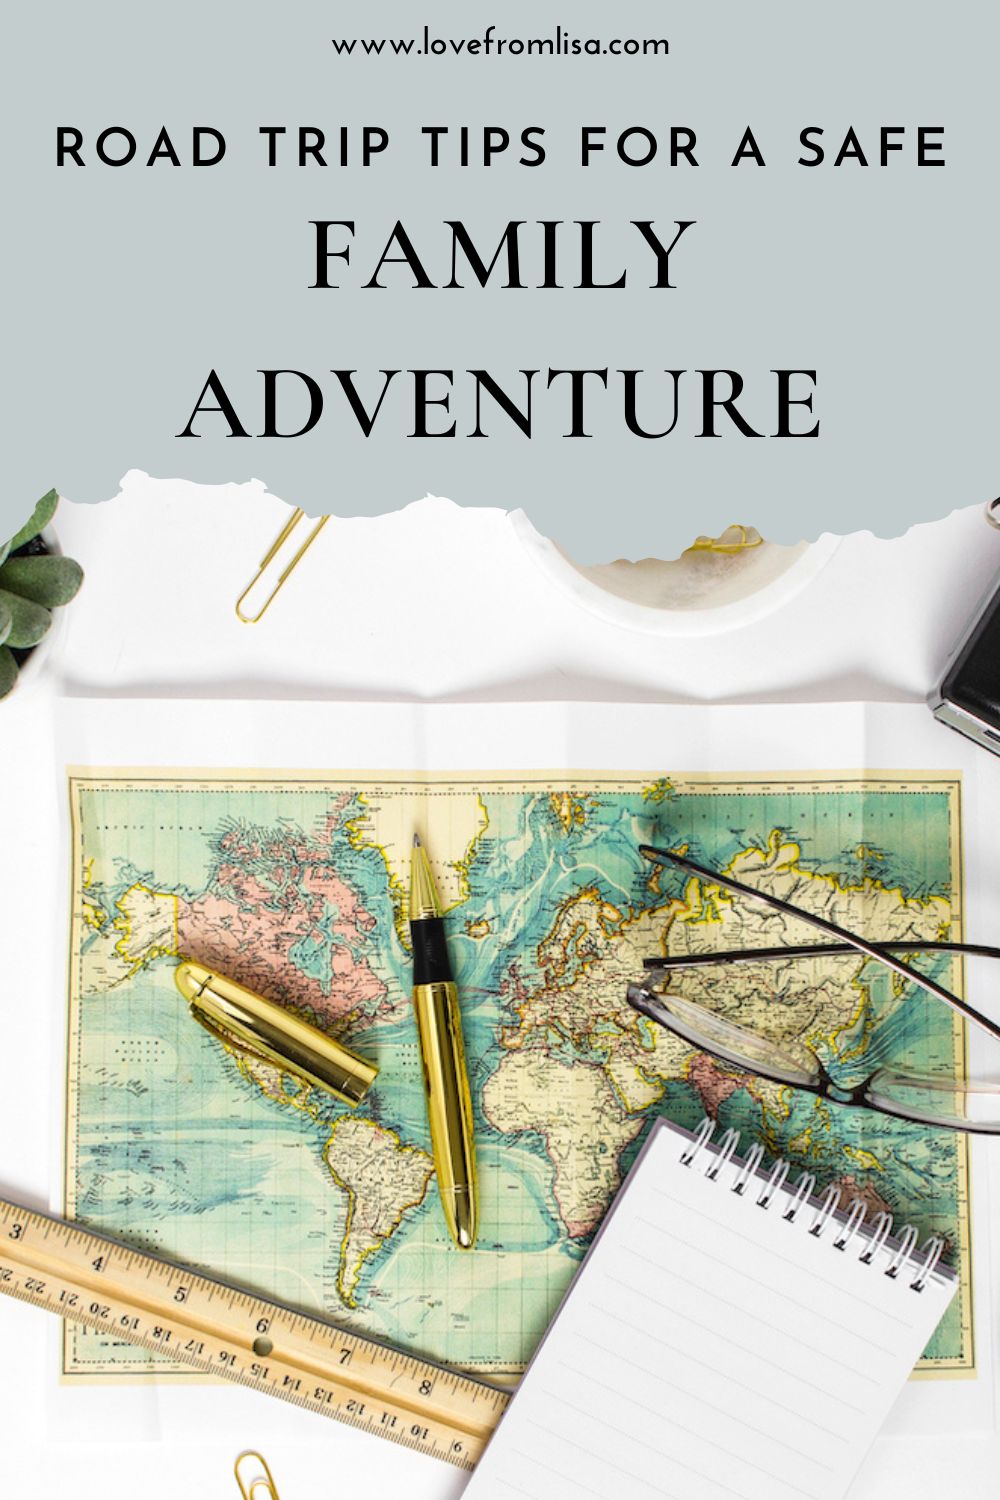 Road trip tips for a safe family adventure Pinterest graphic